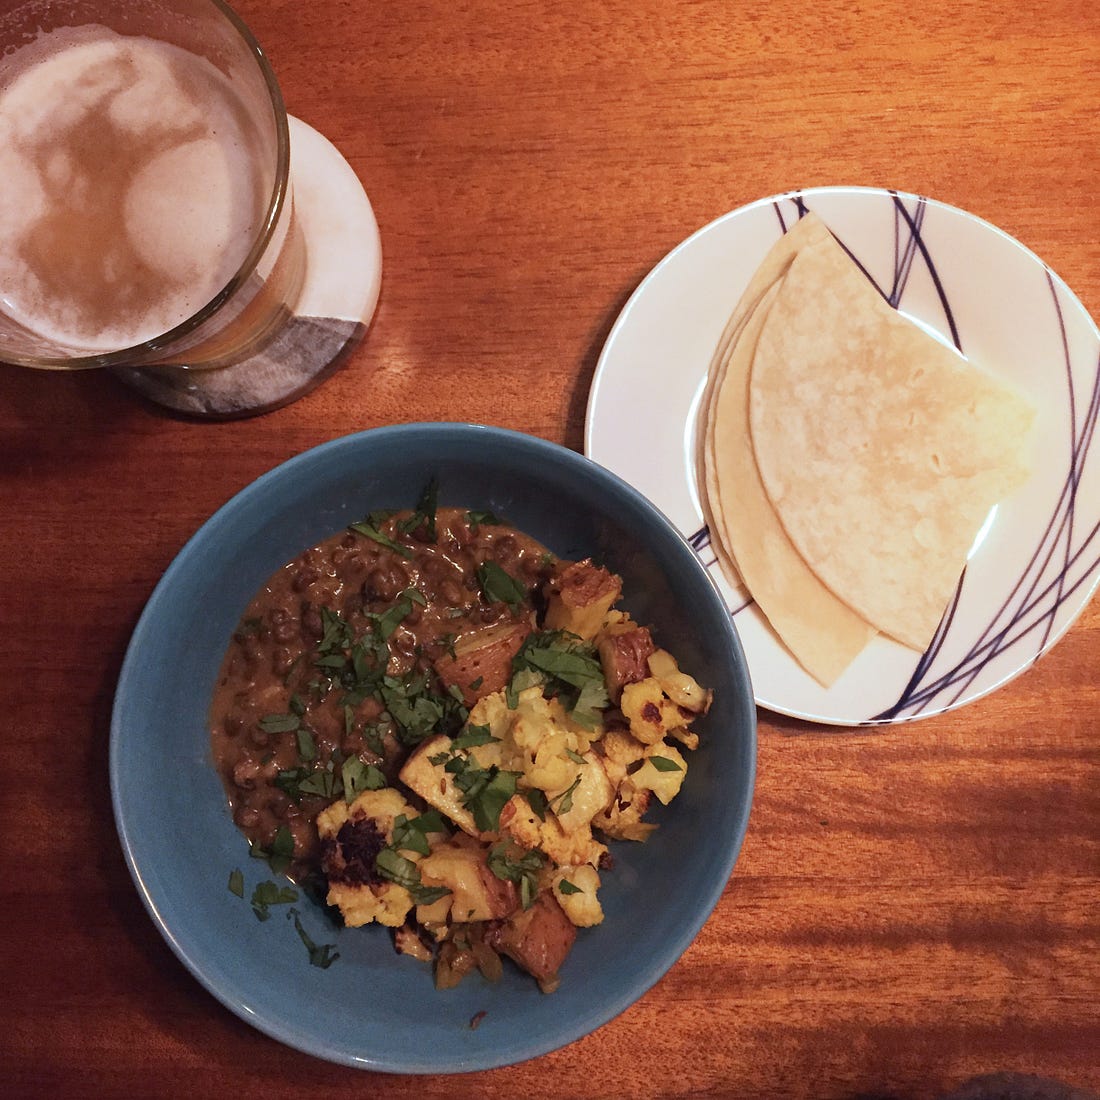 From above, a blue bowl with dal on one side and roasted aloo gobi on the other, sprinkled with cilantro. On a small plate are quarters of a tortilla, and on a coaster in the upper left is a glass of IPA.